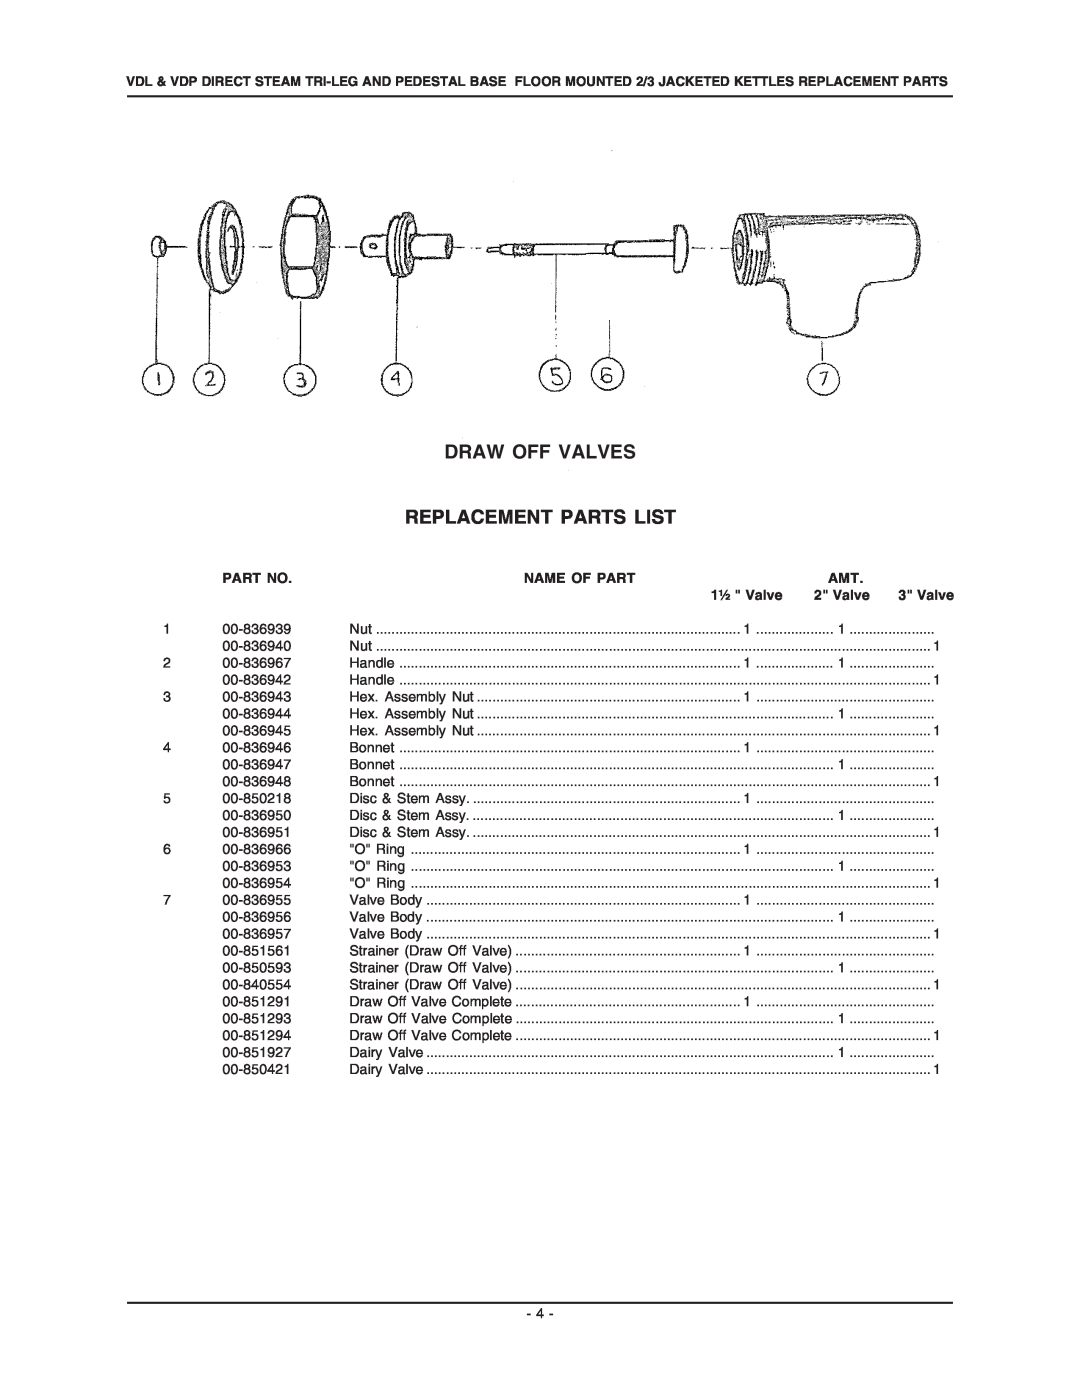 Vulcan-Hart VDP80, VDL20, VDP40, VDP60, VDP20, VDL100, VDL60 Draw Off Valves Replacement Parts List, Name Of Part, 1½ Valve 